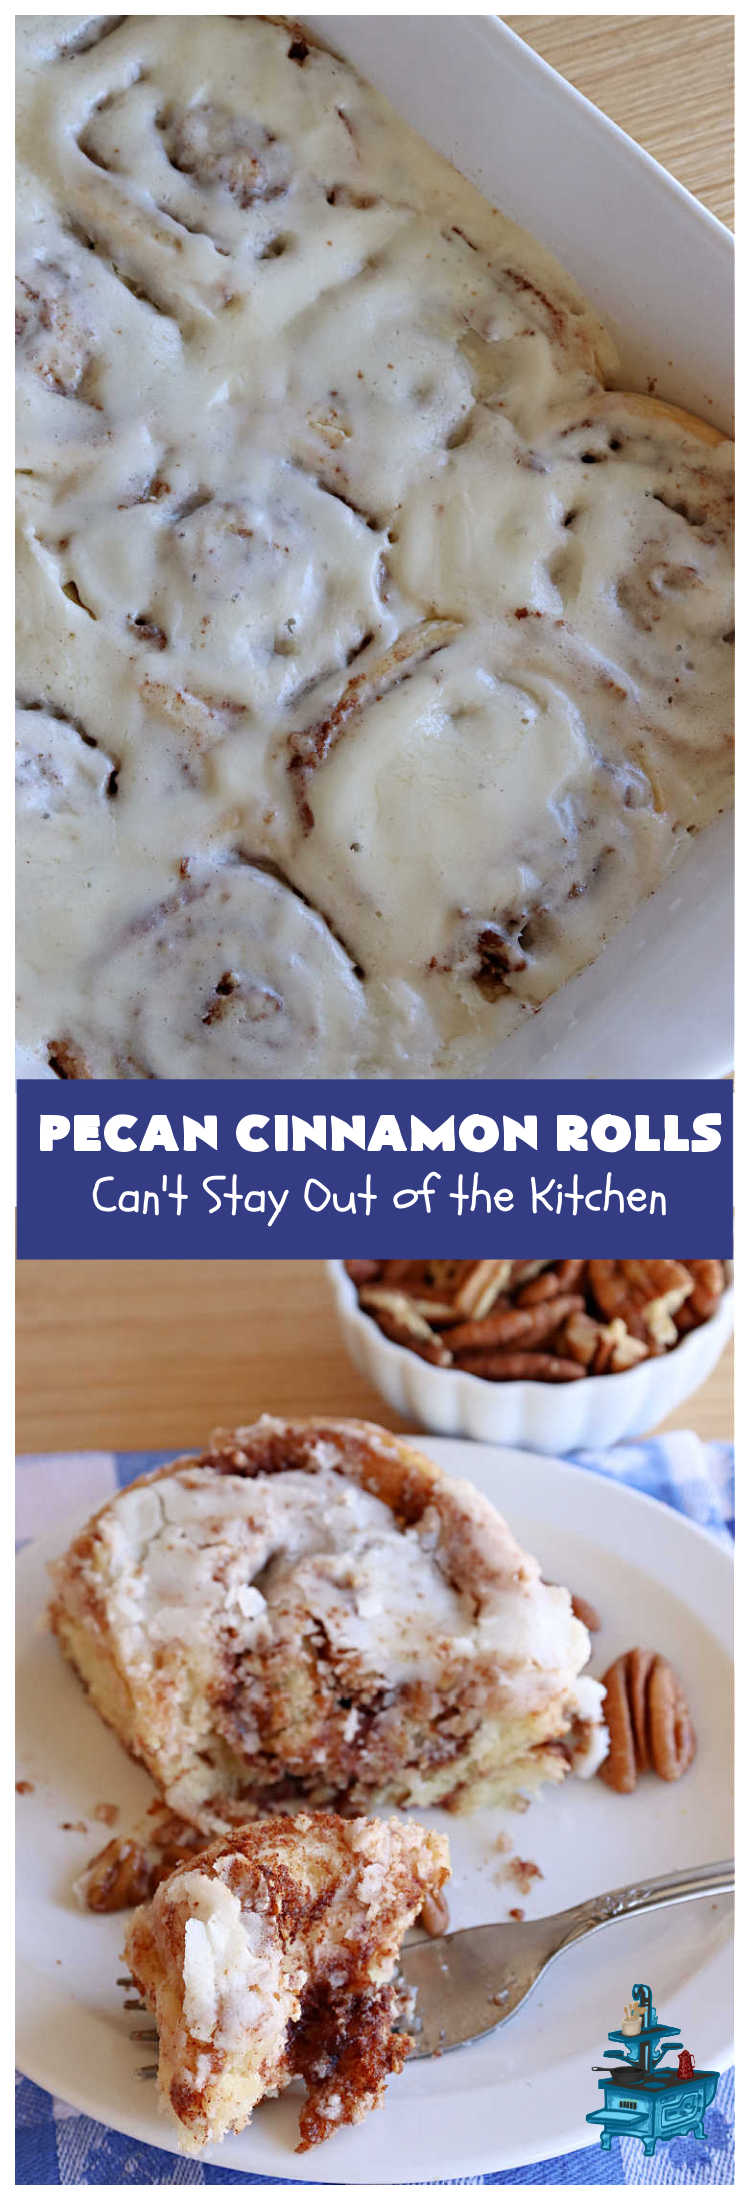 Pecan Cinnamon Rolls | Can't Stay Out of the Kitchen | these delightful #CinnamonRolls are light & fluffy & so easy since they're mixed & raised in the #breadmaker! They have a luscious #ButtercreamFrosting & a #cinnamon & #pecan filling that will make you swoon from the first bite! Great for a #holiday #breakfast  like #Thanksgiving or #Christmas. #PecanCinnamonRolls